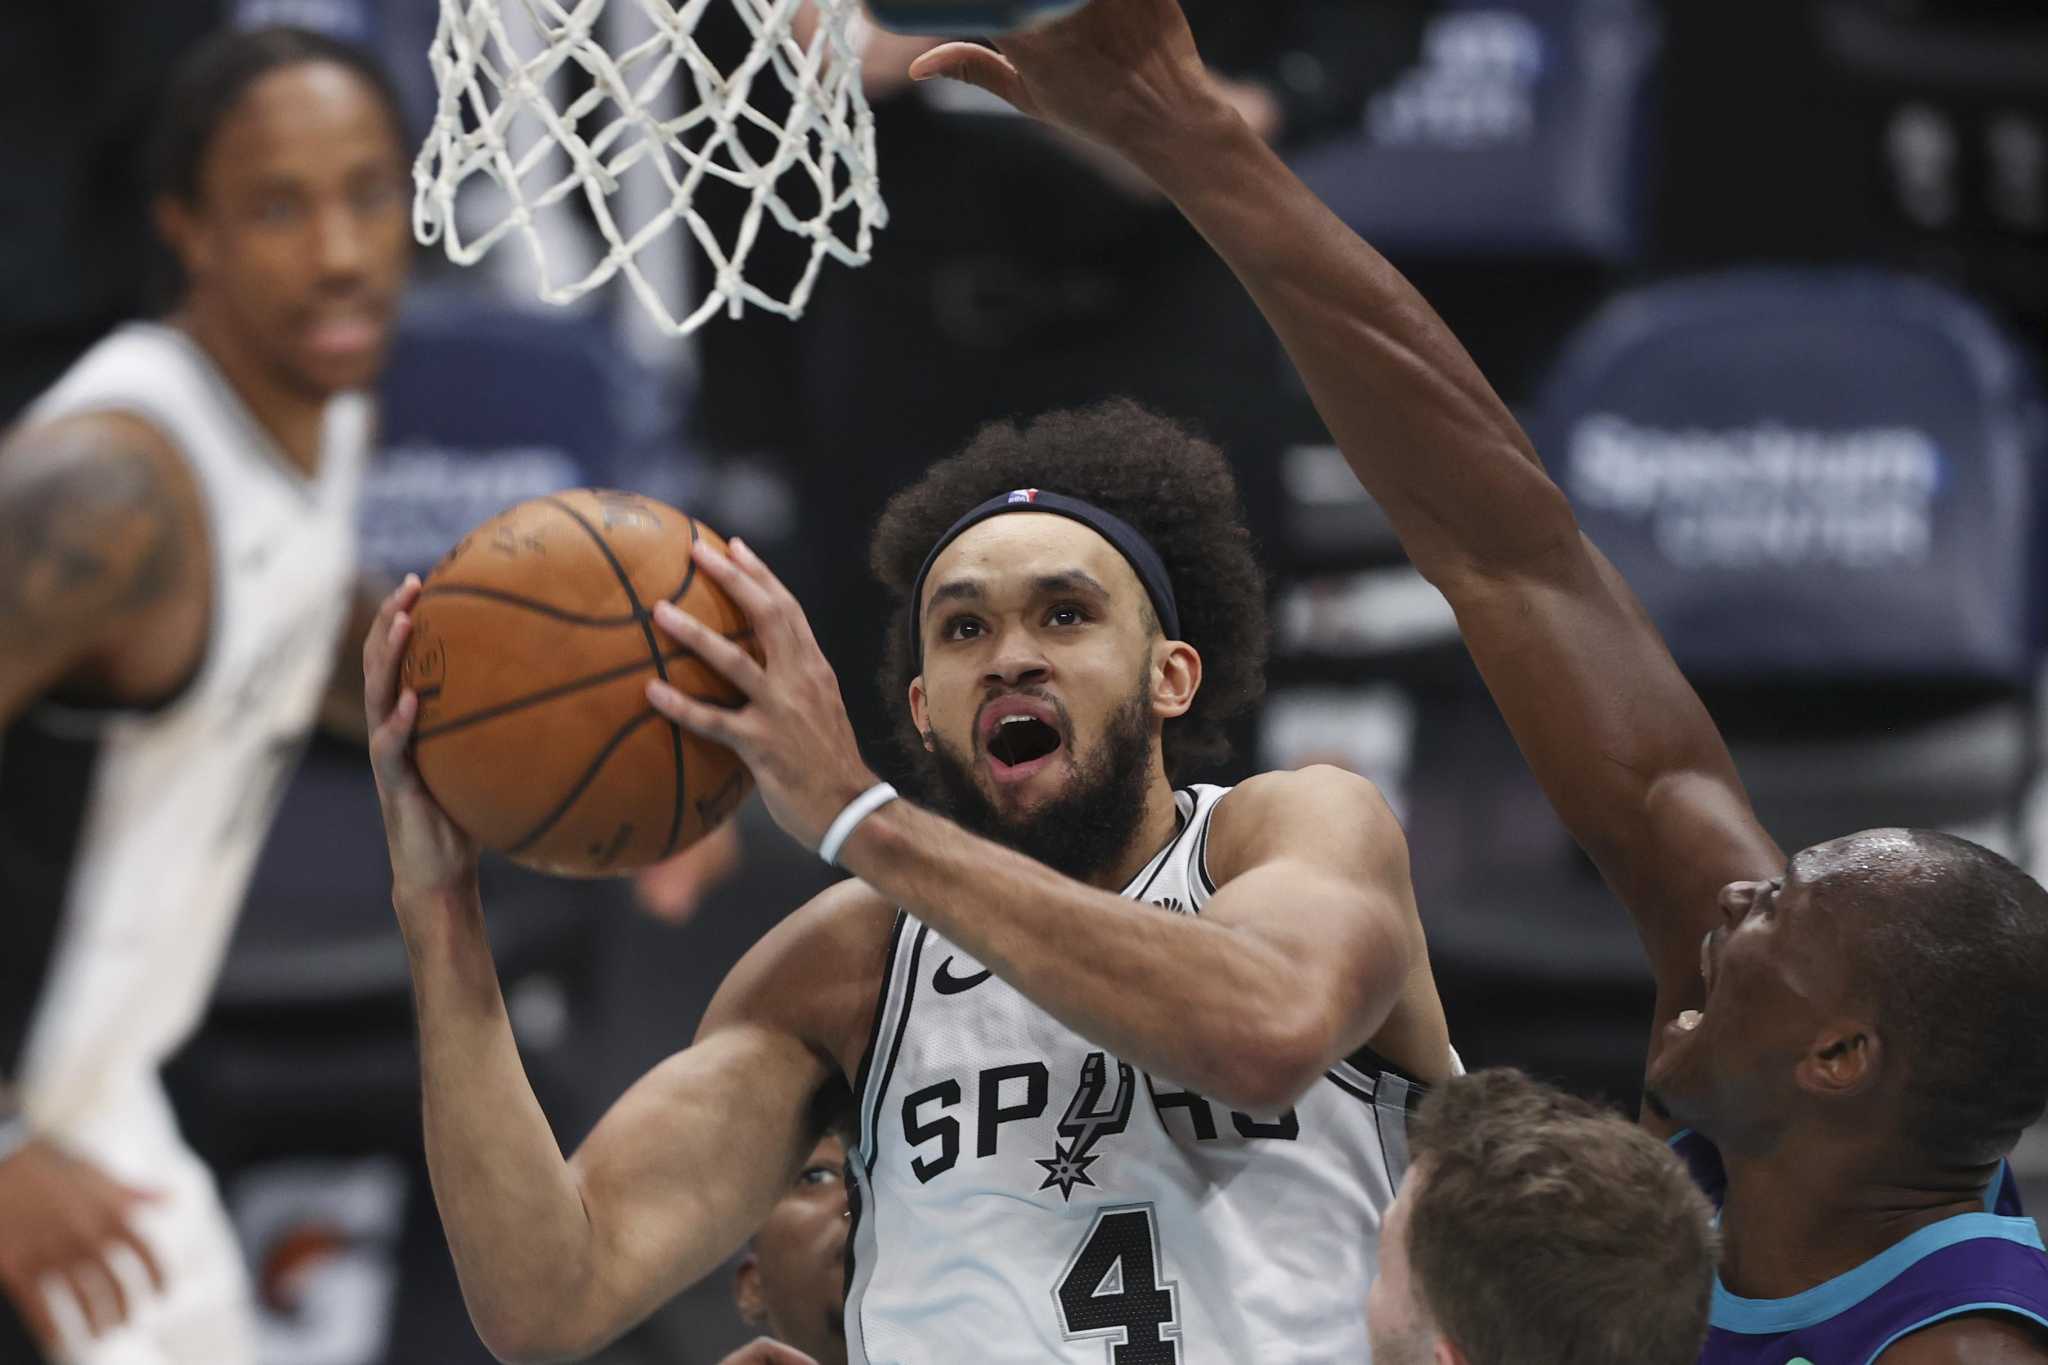 Injured ankle latest misfortune to hit Spurs' Derrick White